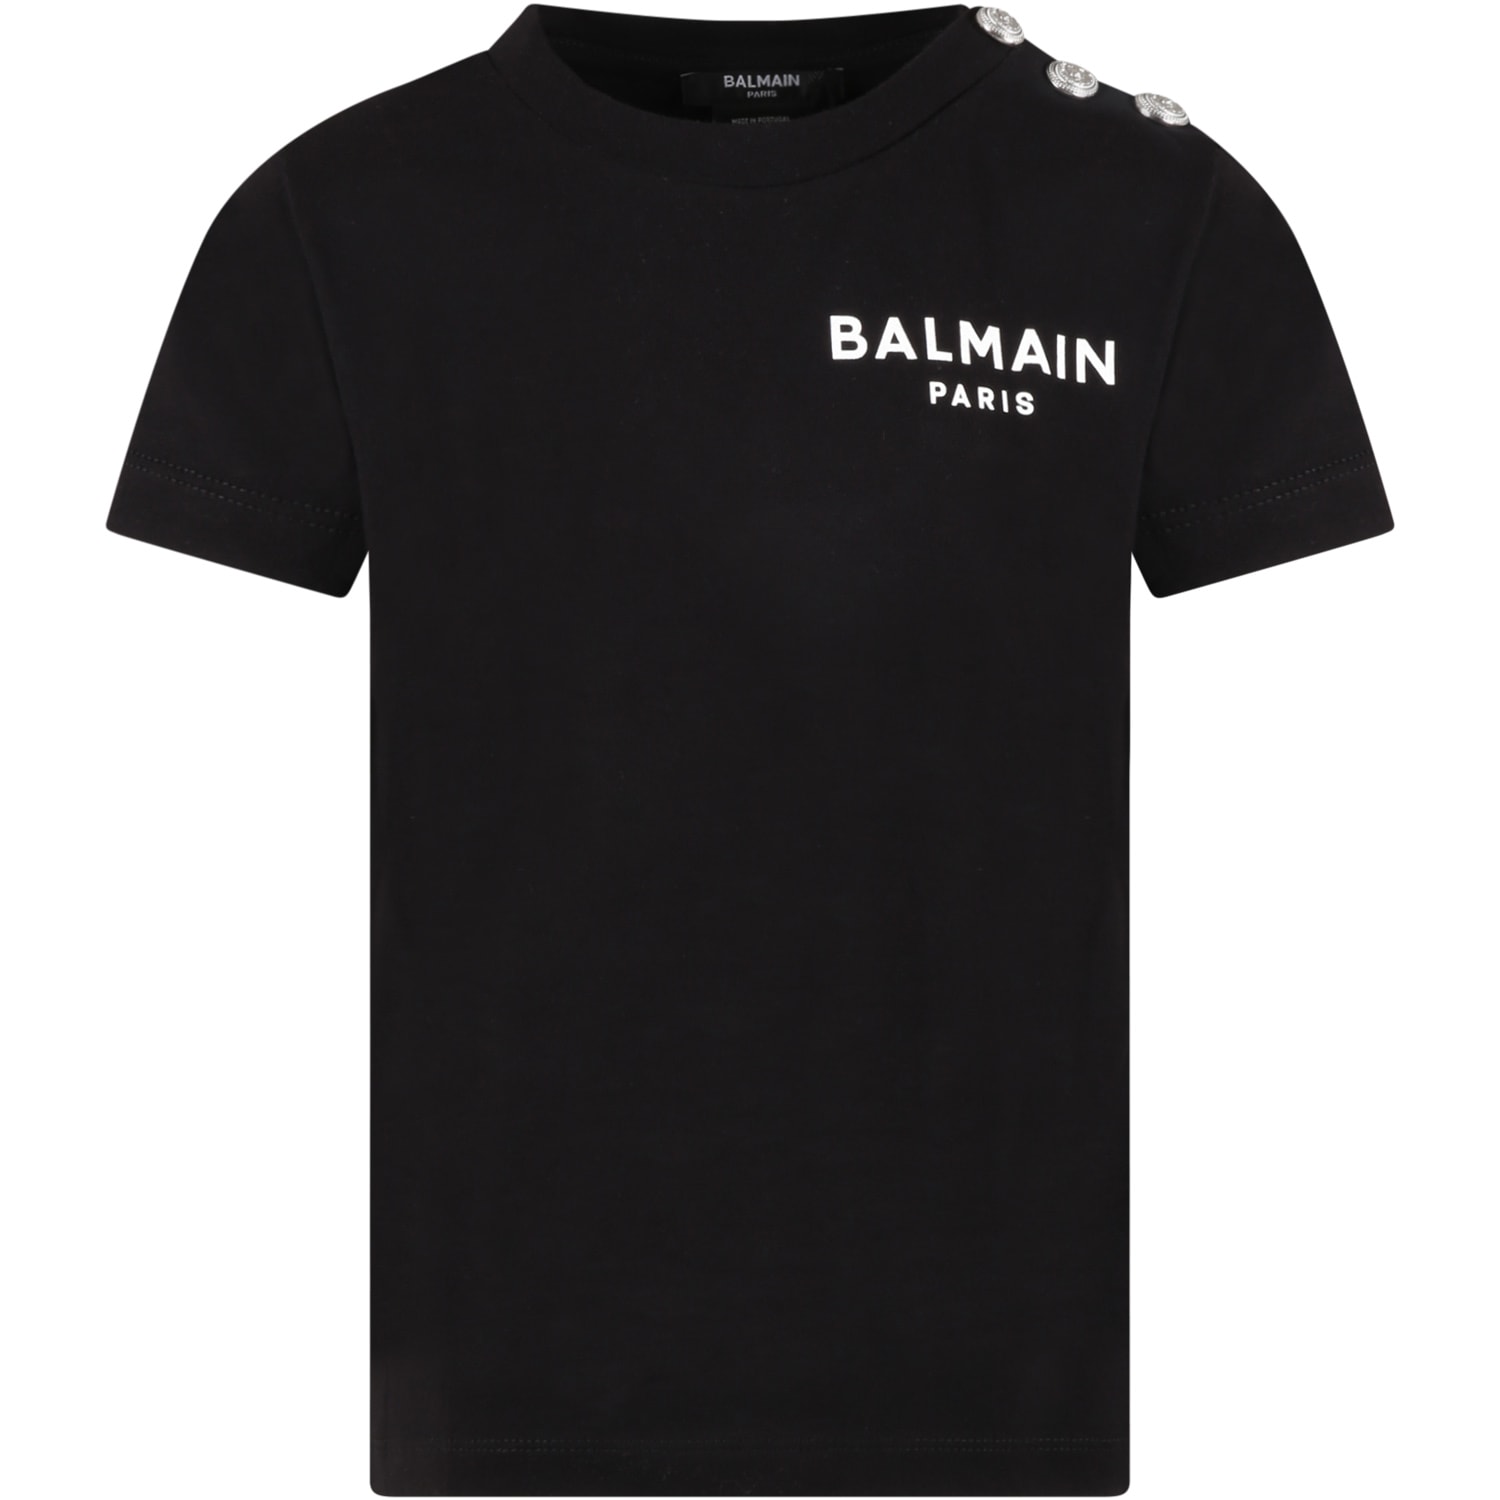 Balmain Black T-shirt For Kids With White Logo And Iconic Buttons